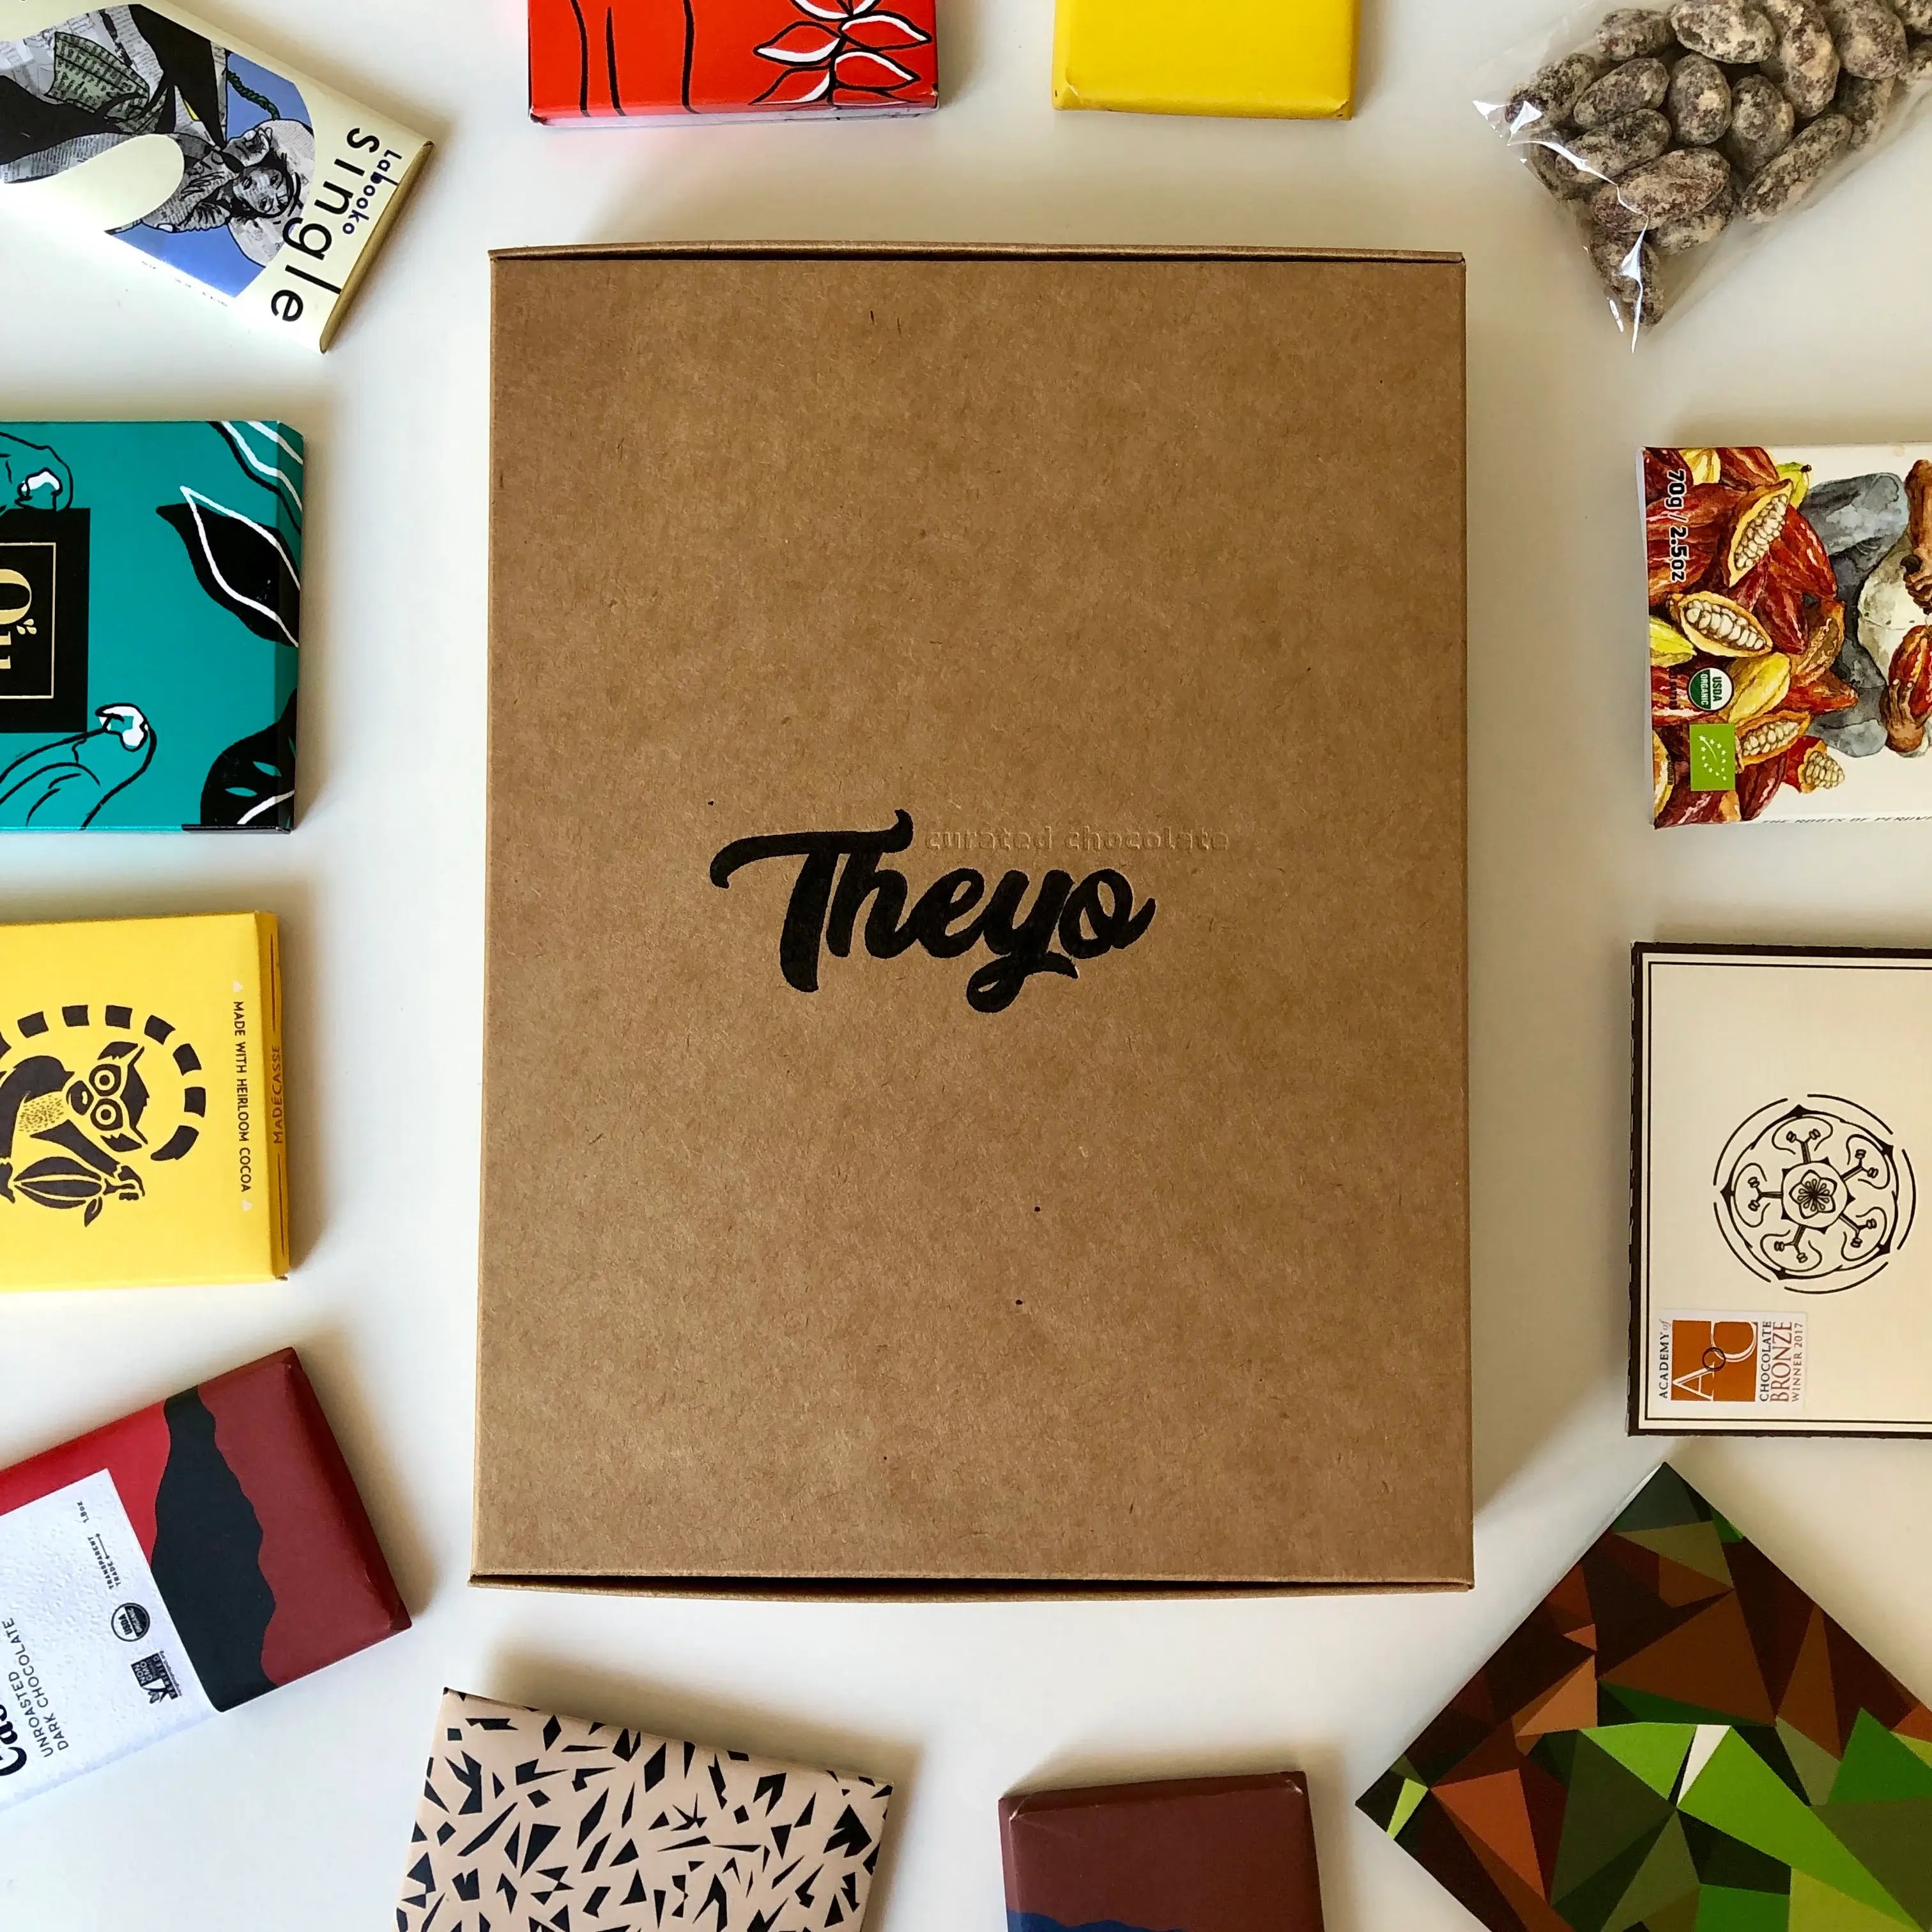 Theyo gift subscription - voucher